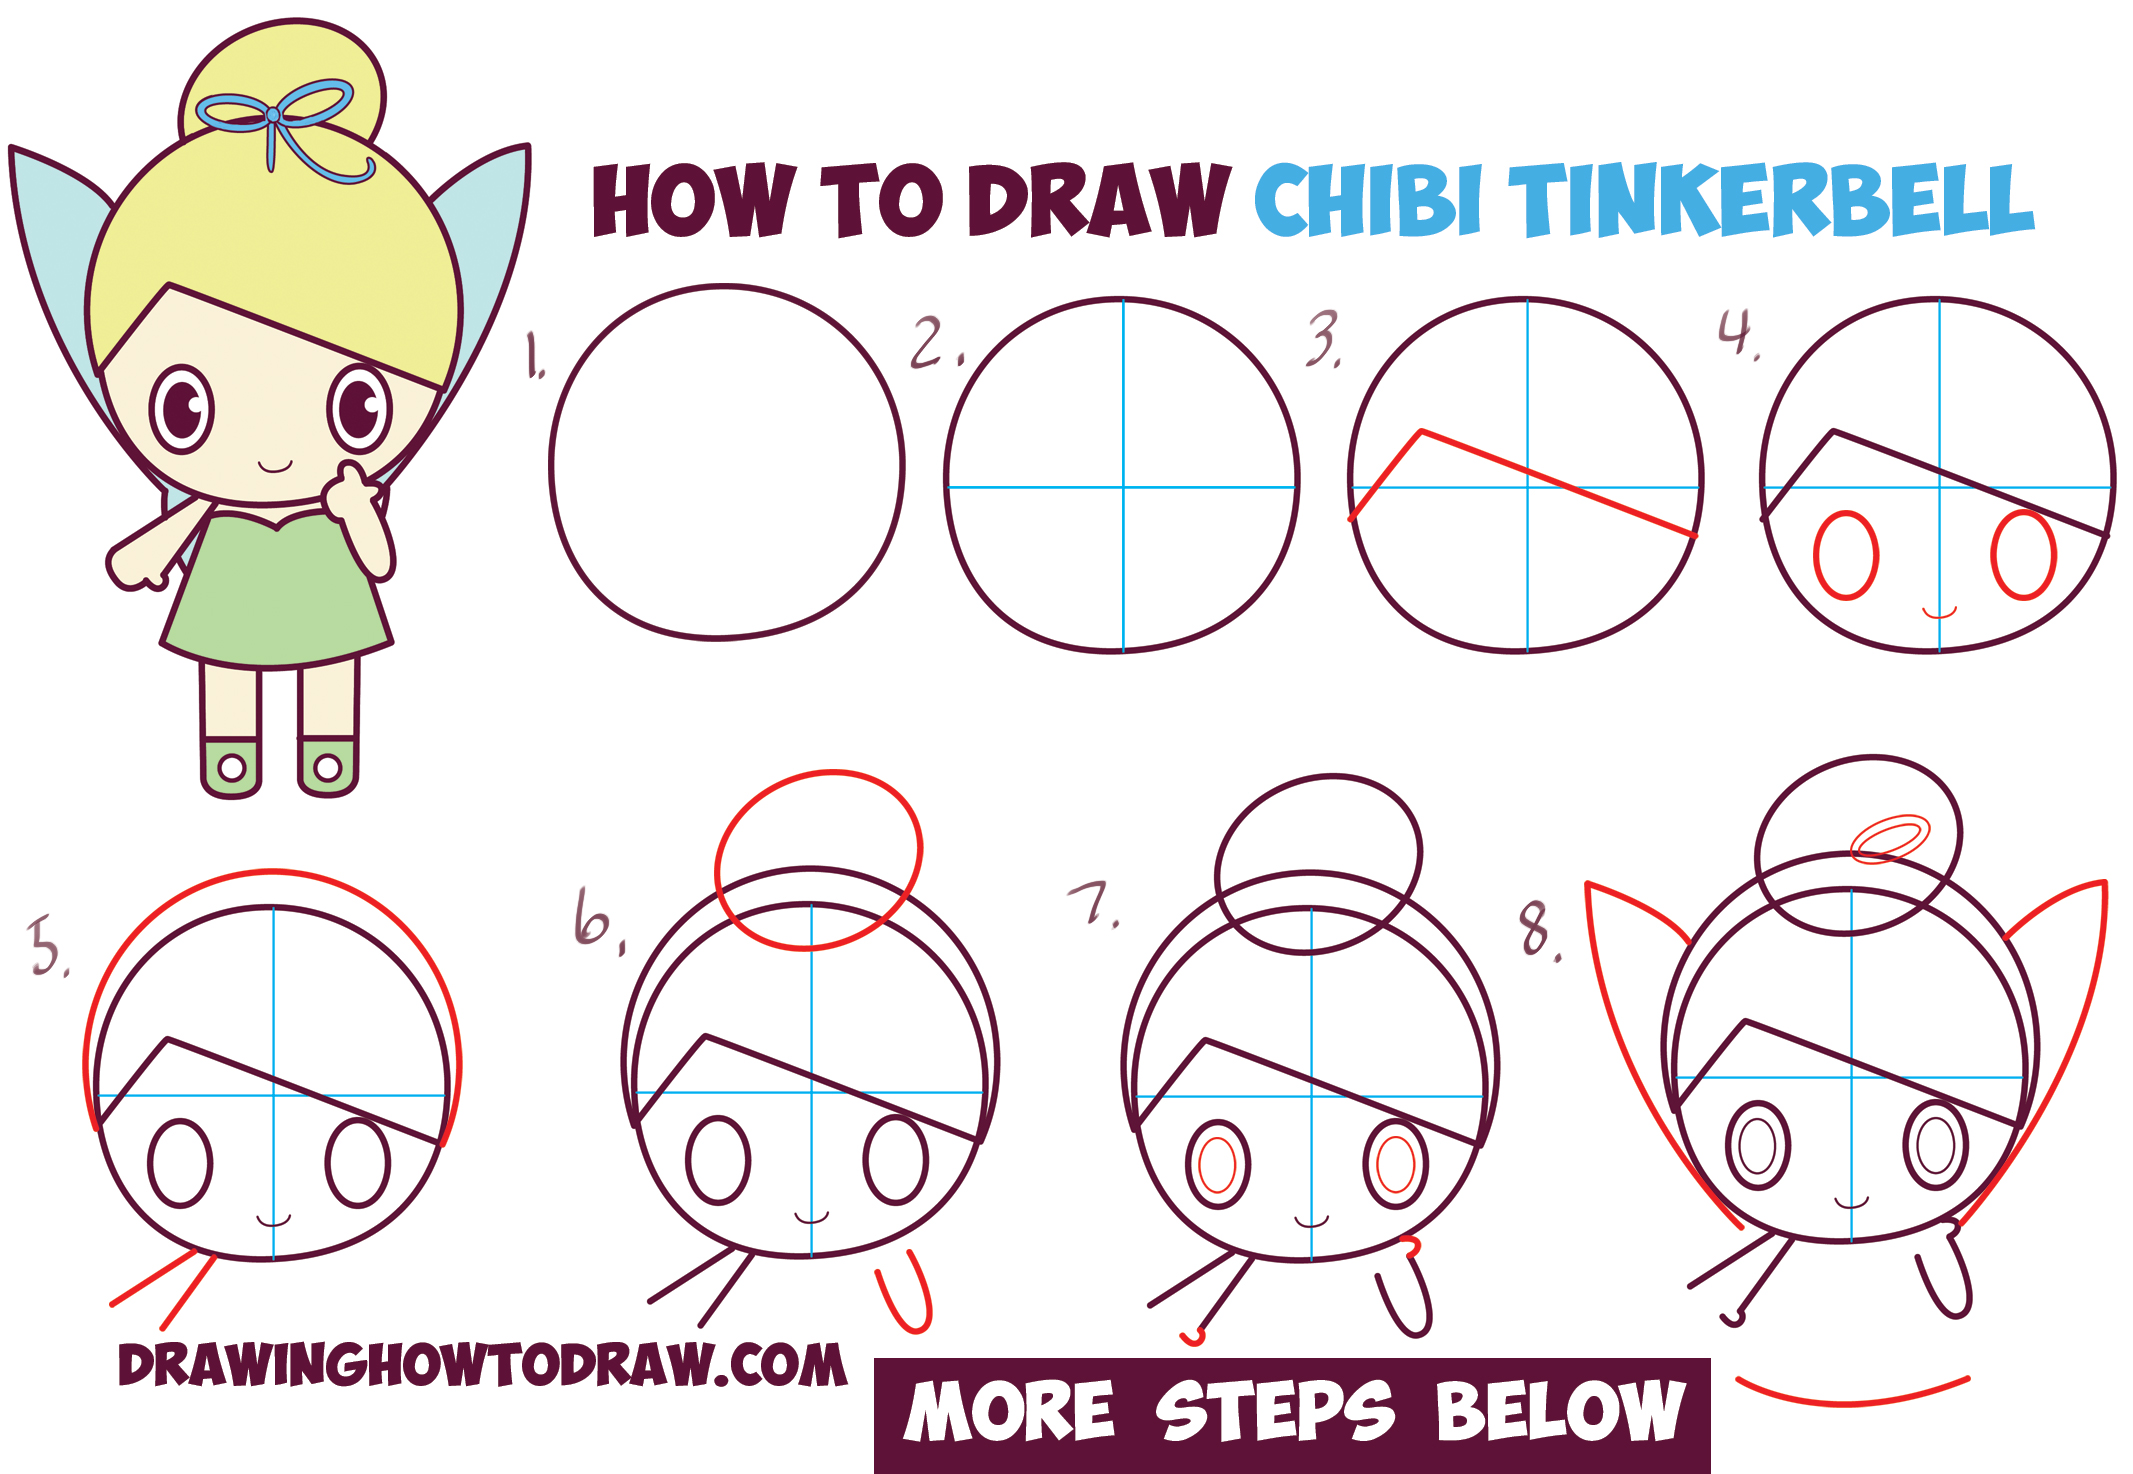 How to Draw Chibi Tinkerbell - the Disney Fairy in Easy Step by Step